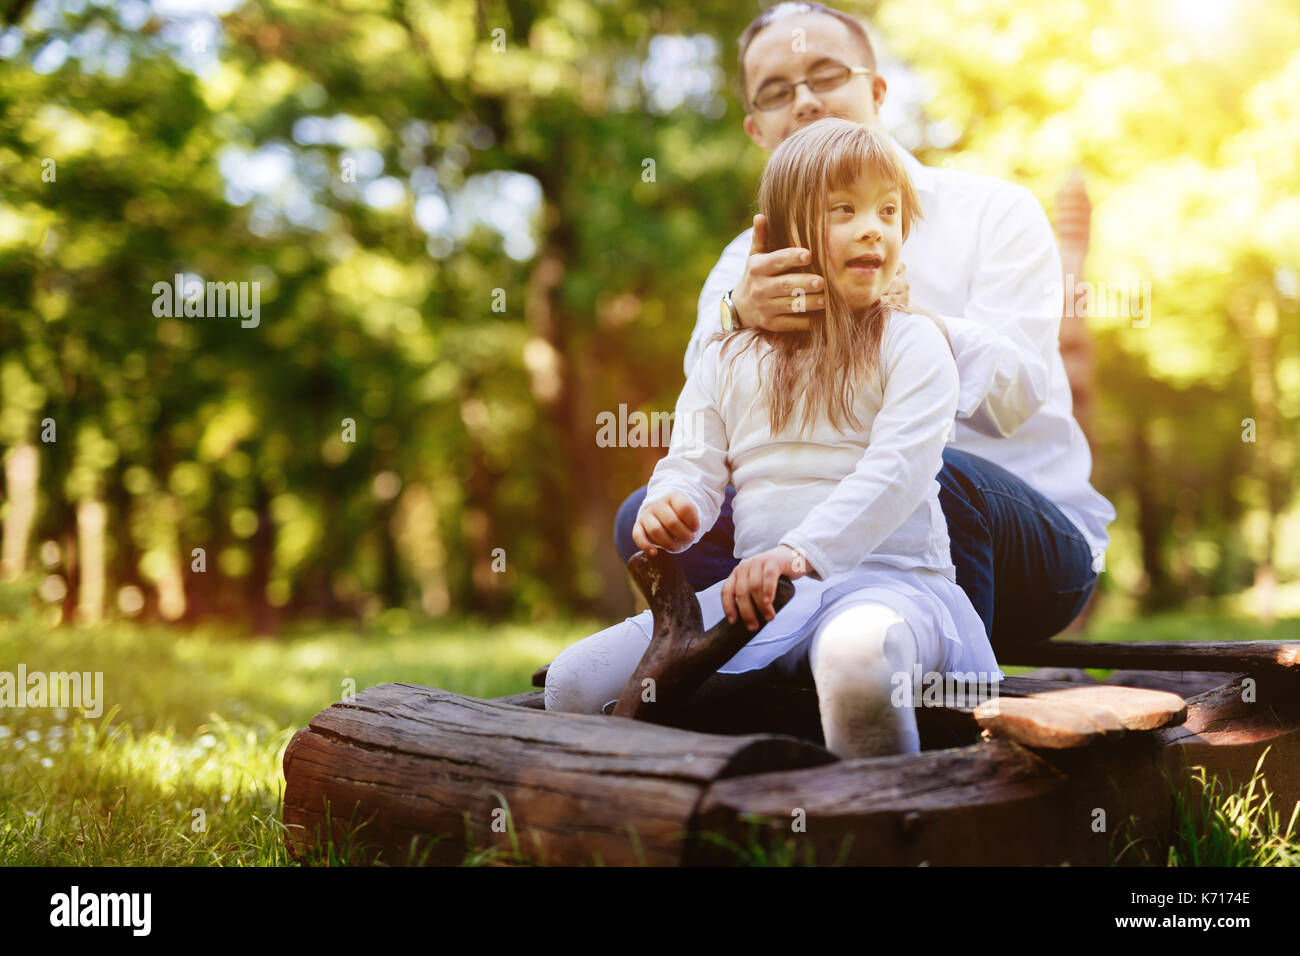 People with down syndrom caring for each other Stock Photo